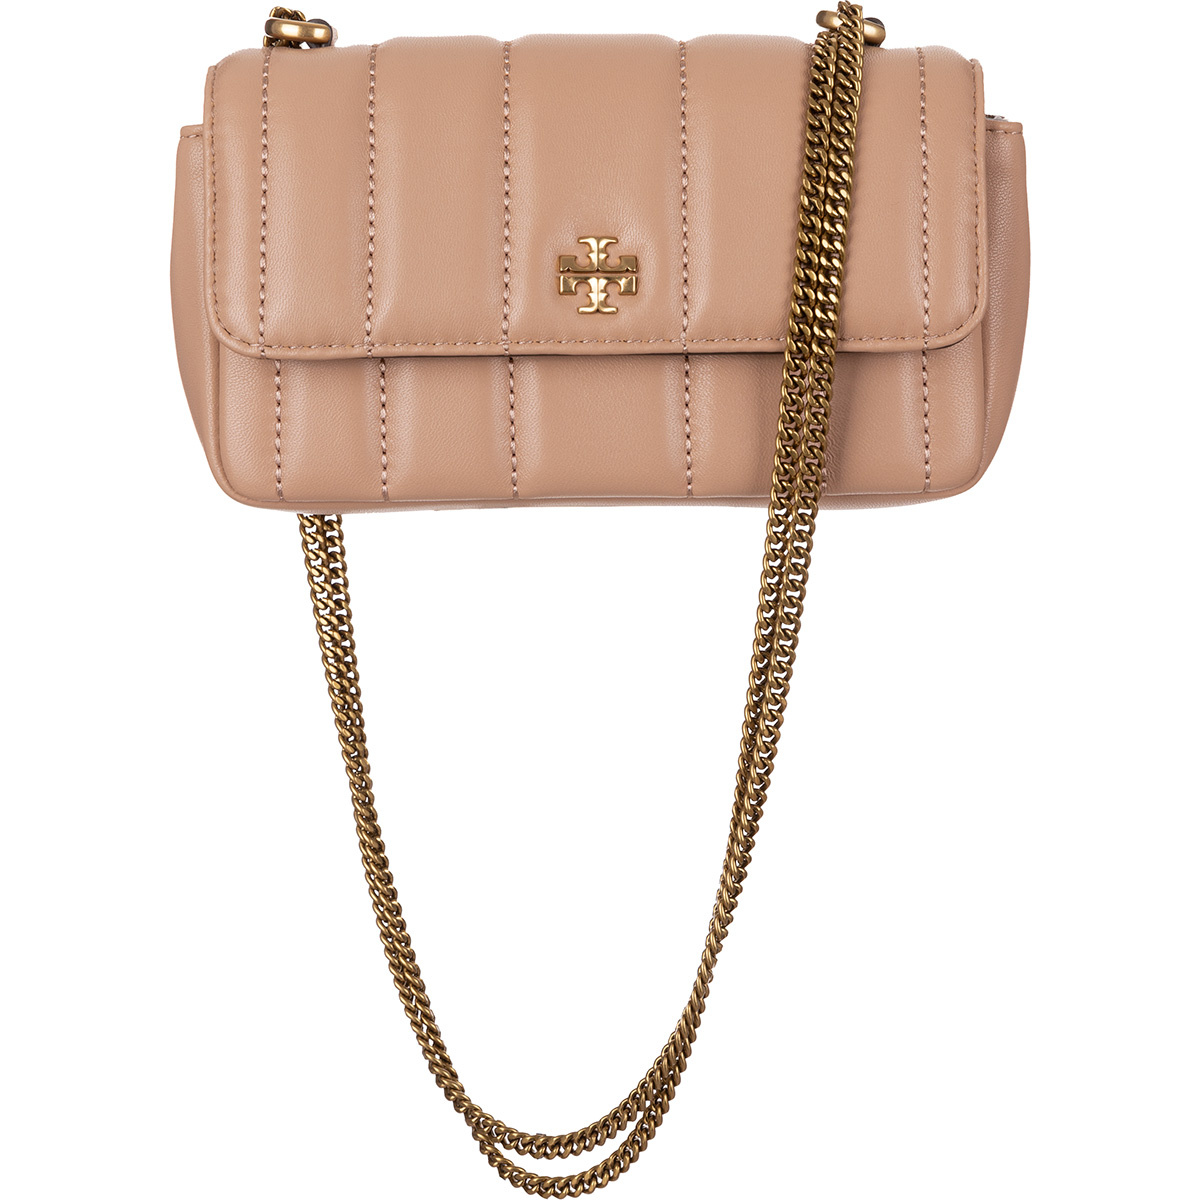 Tory Burch Kira Mini Flap Quilted Leather Shoulder Bag